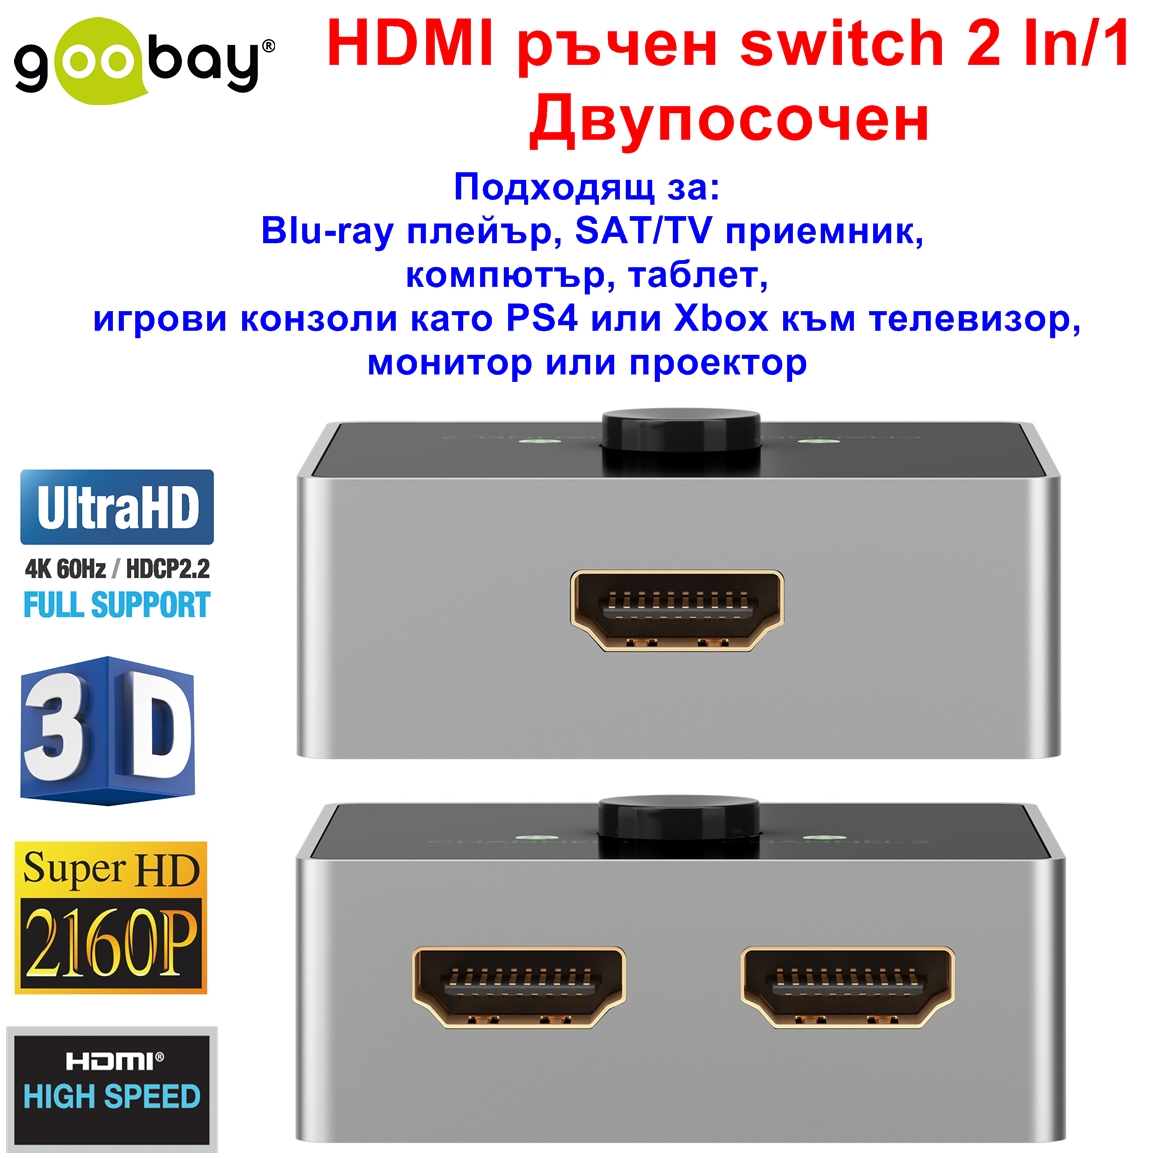 HDMI ръчен switch 2 In/1 Двупосочен Goobay